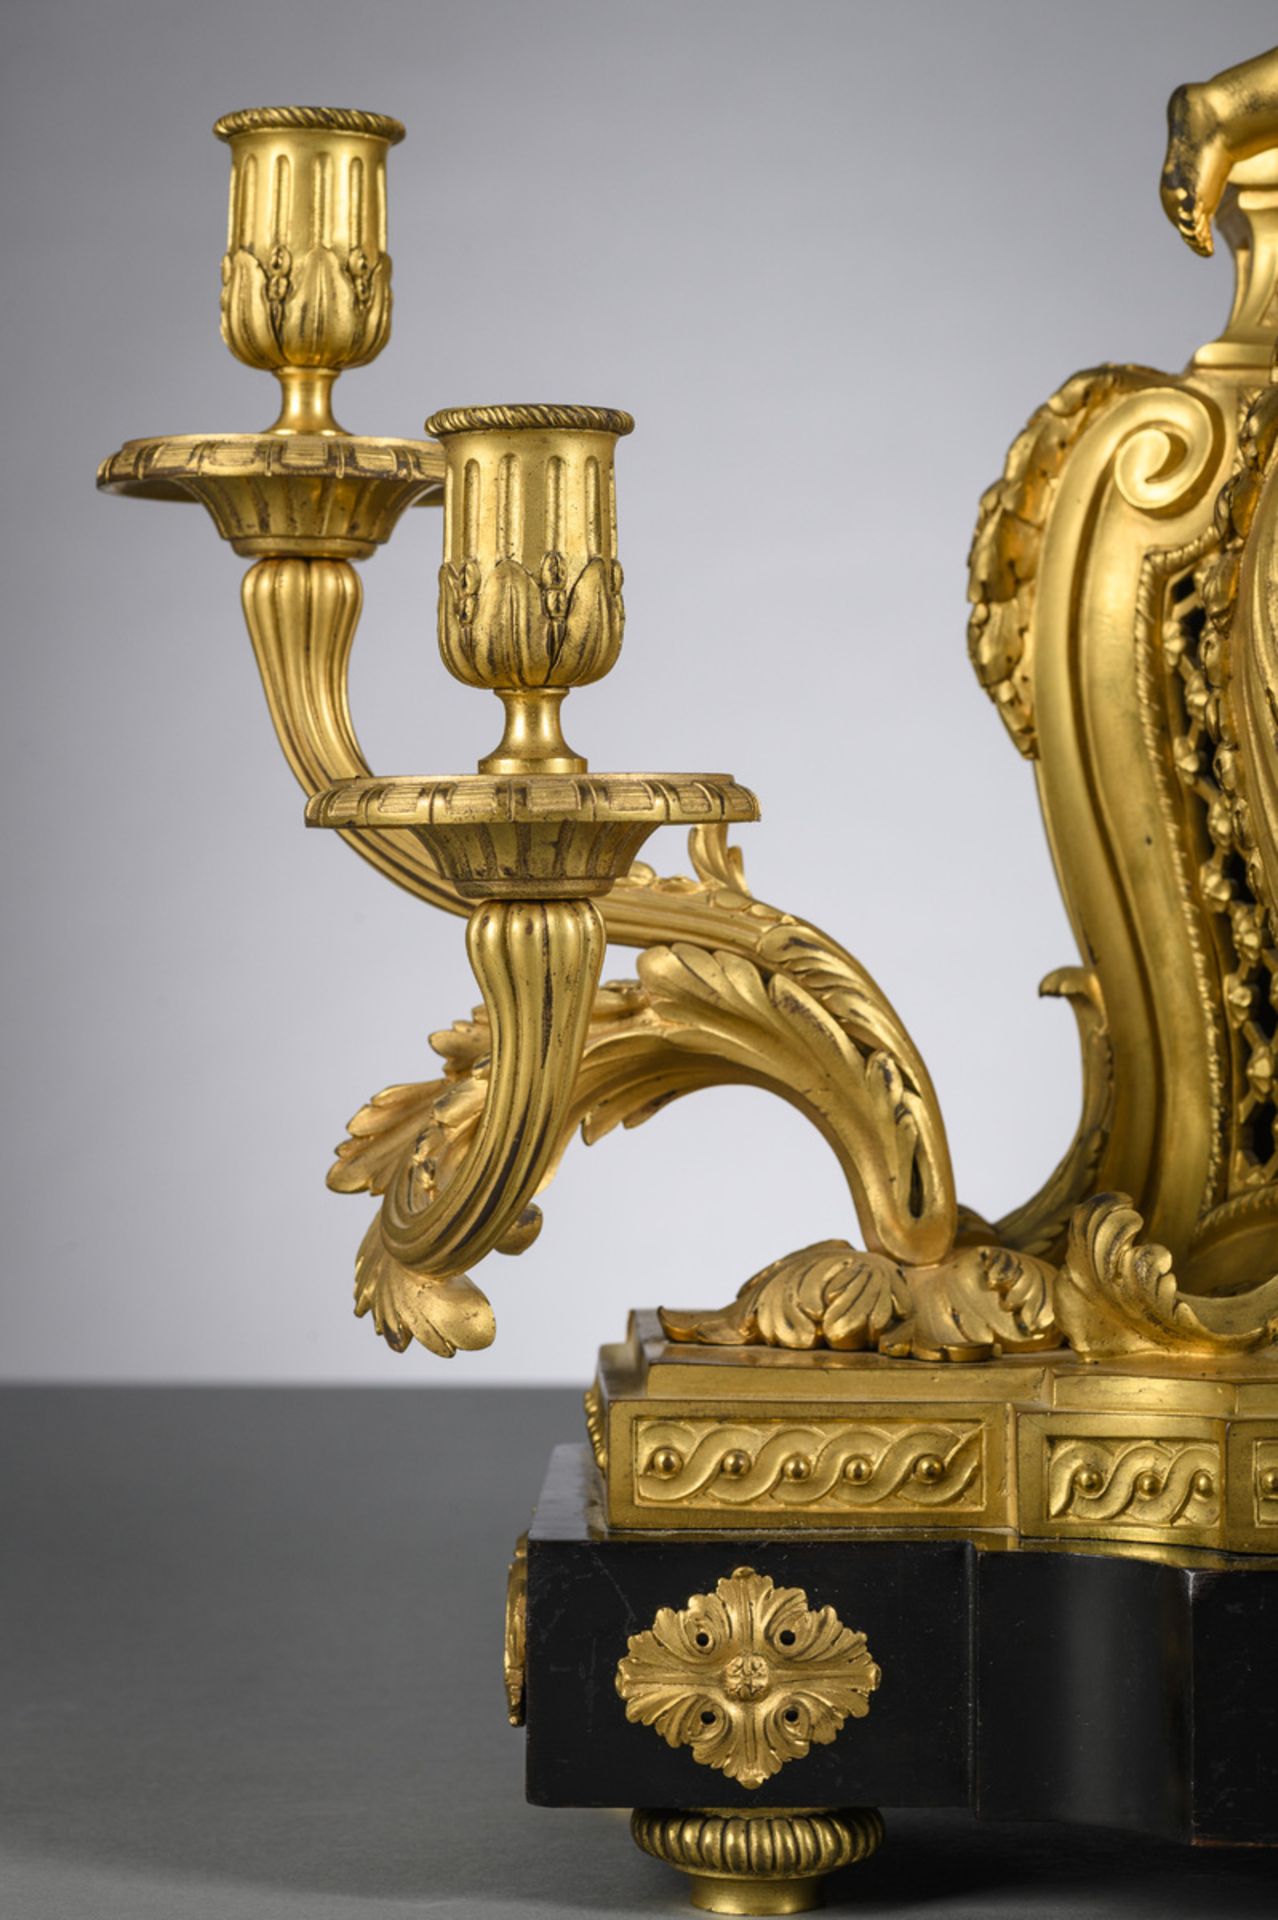 Louis XV clock in gilt bronze with wooden base, by F. Berthoud à Paris (58x71x24) - Image 7 of 7